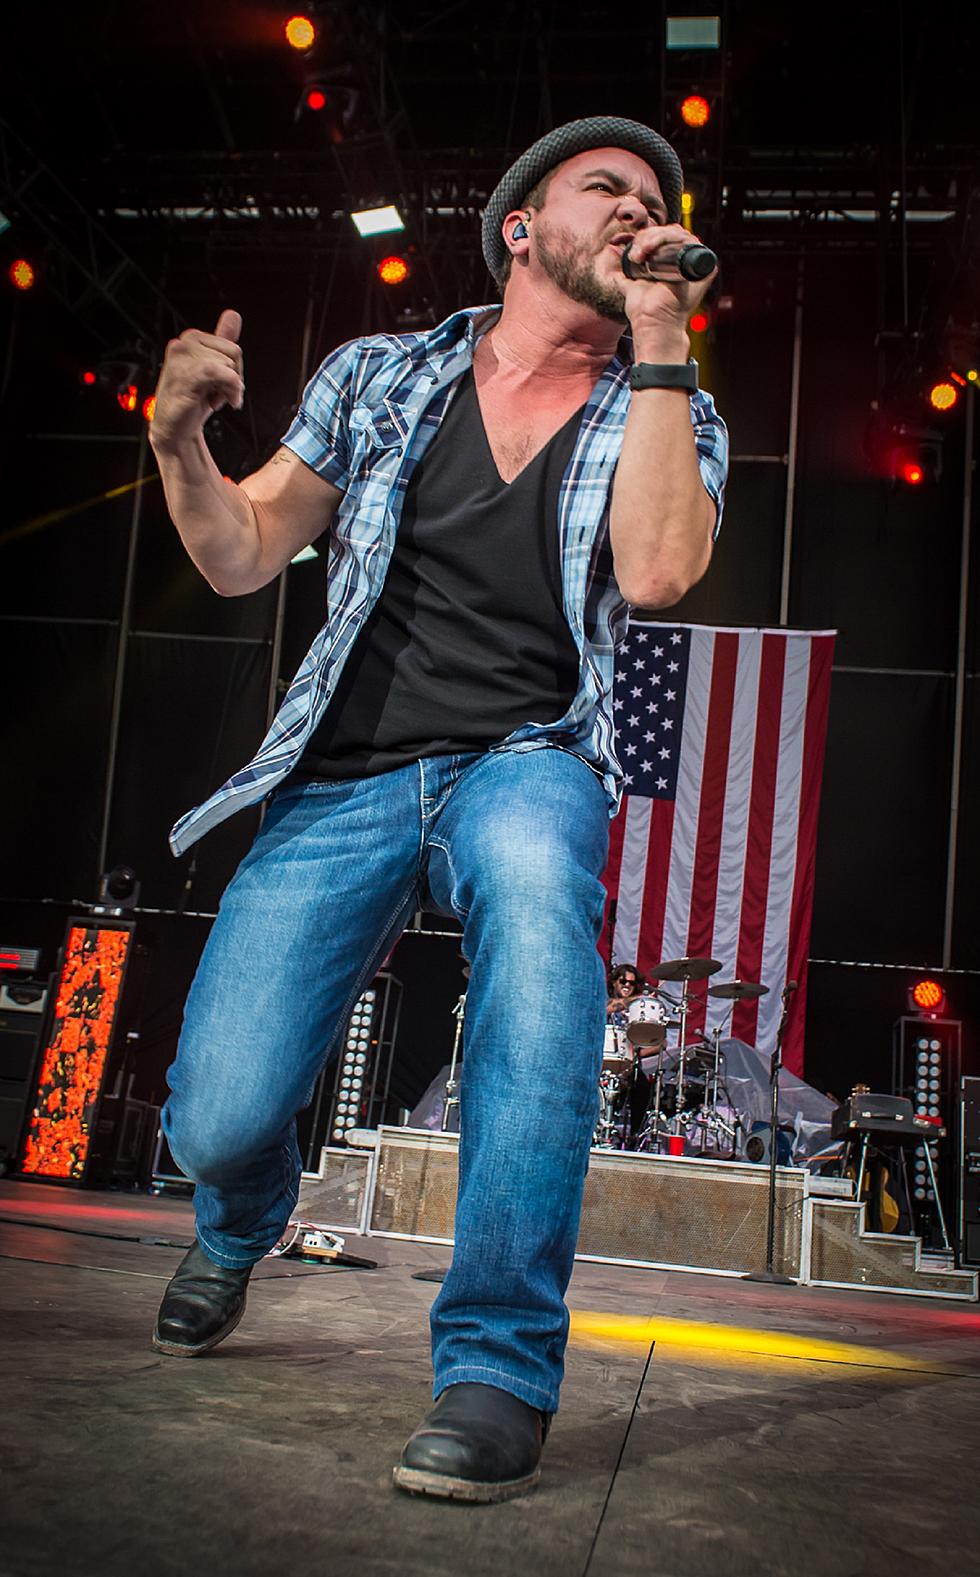 Want to See The Eli Young Band or Joe Nichols? Here’s How You Can Get Tickets